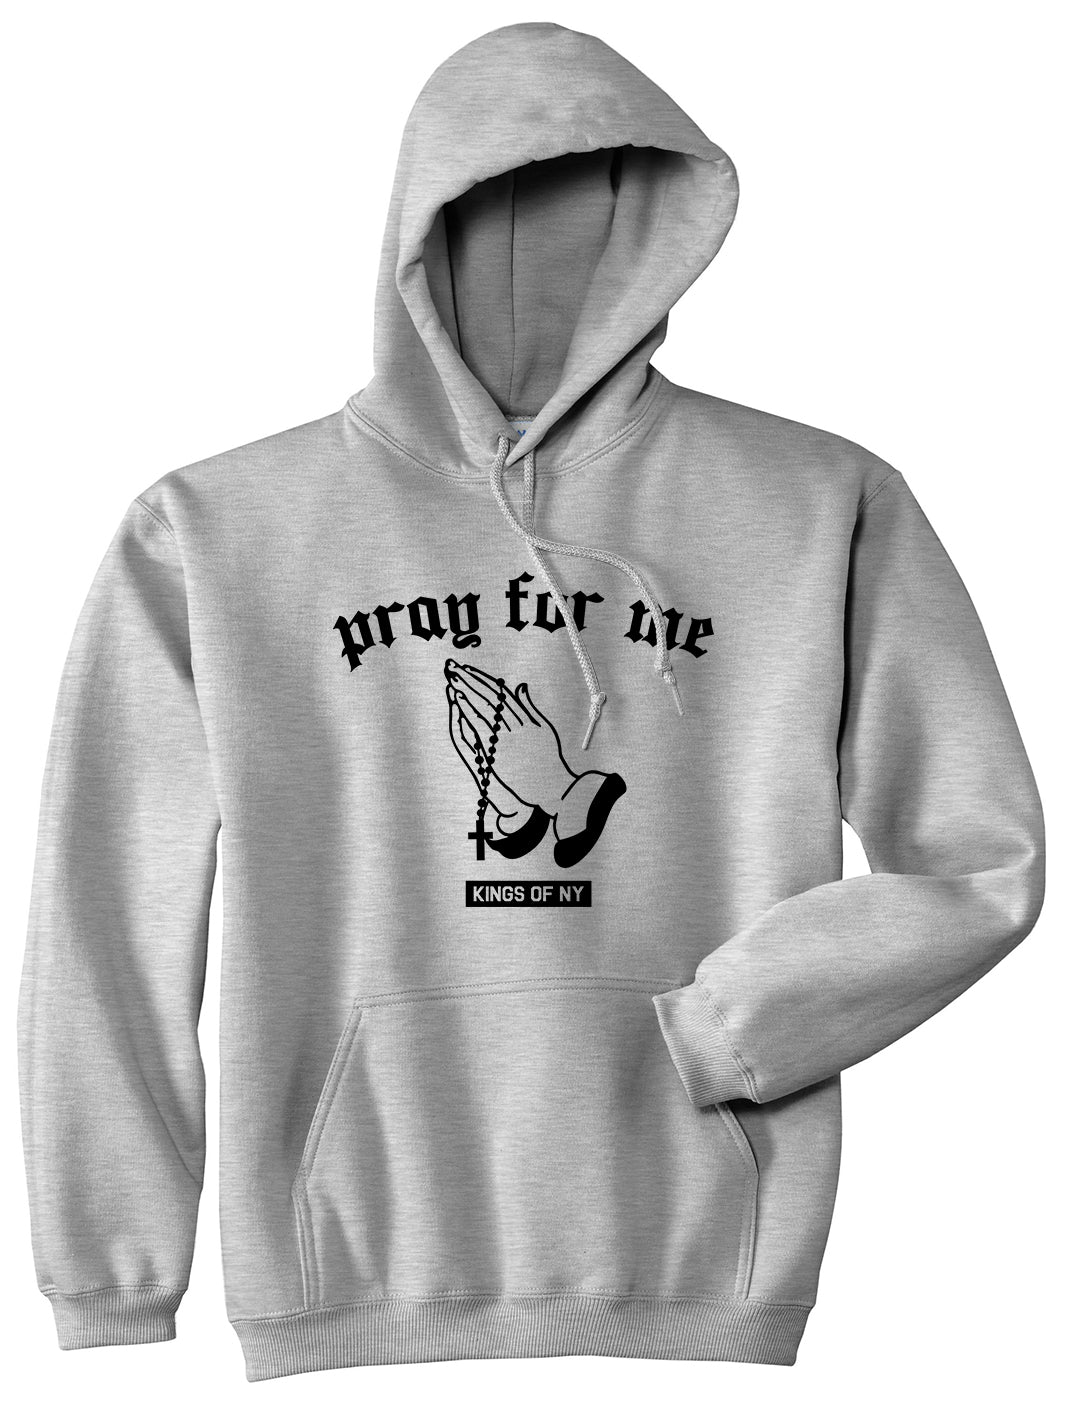 Pray For Me Mens Pullover Hoodie Grey by Kings Of NY